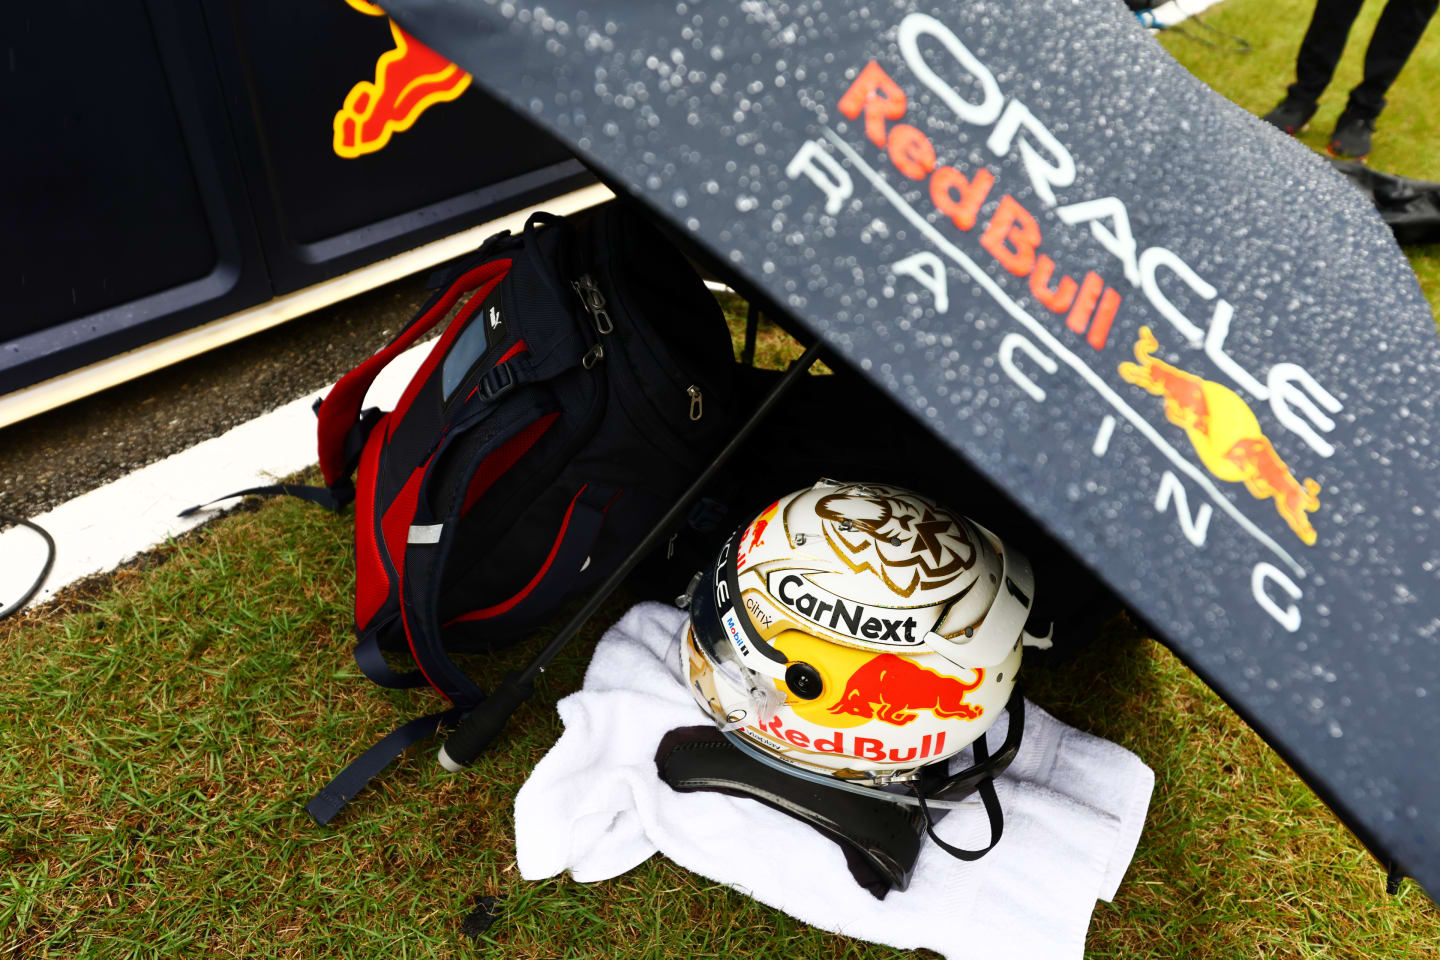 SUZUKA, JAPAN - OCTOBER 09: The race helmet of Max Verstappen of the Netherlands and Oracle Red